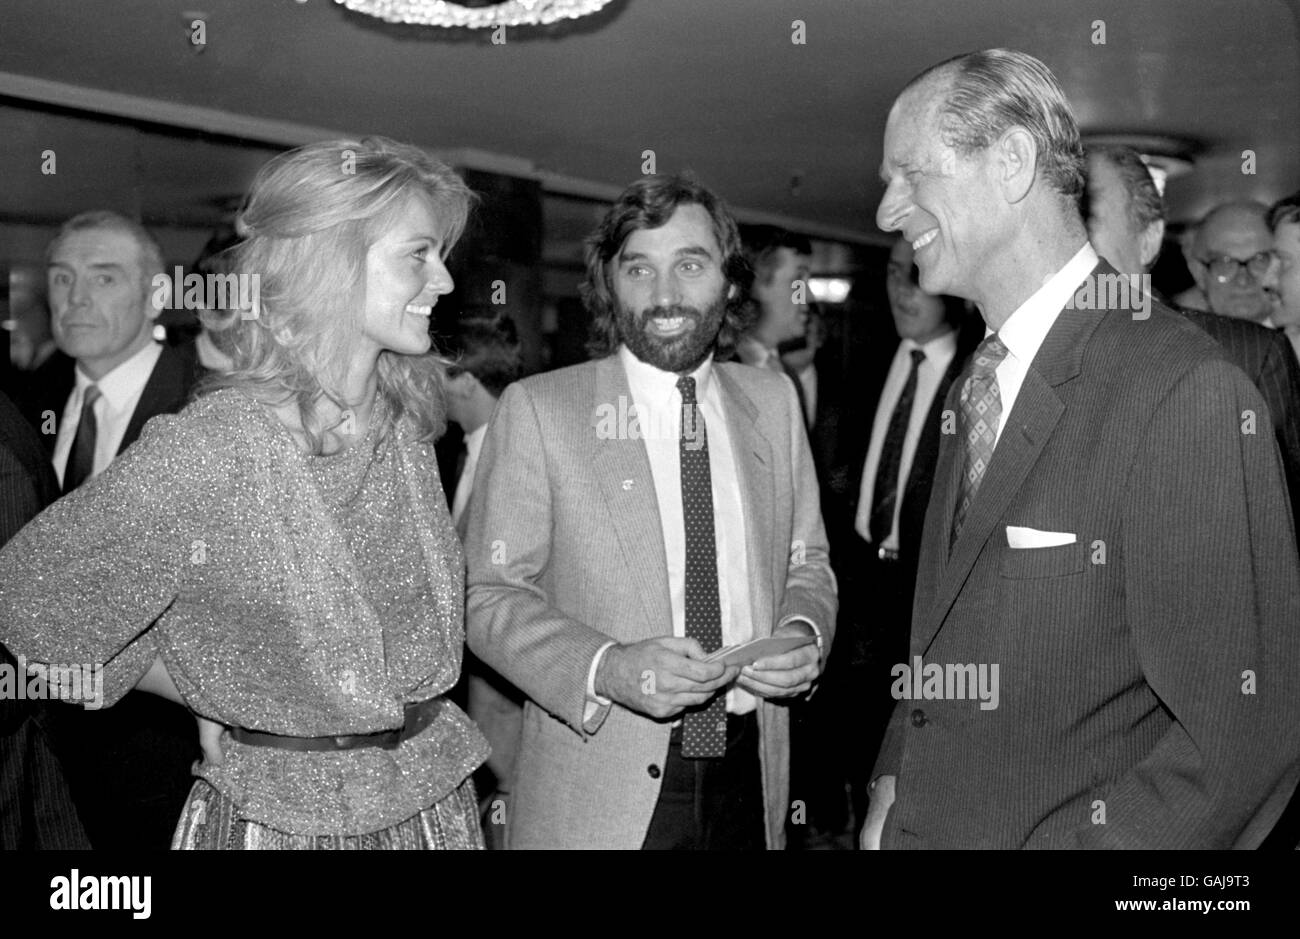 George Best (c) and his girlfriend, former Miss World Mary Stavins (l), chat to HRH The Duke of Edinburgh (r) at the Variety Club National Sponsored Sport Luncheon, held at the Grosvenor House Hotel in London Stock Photo